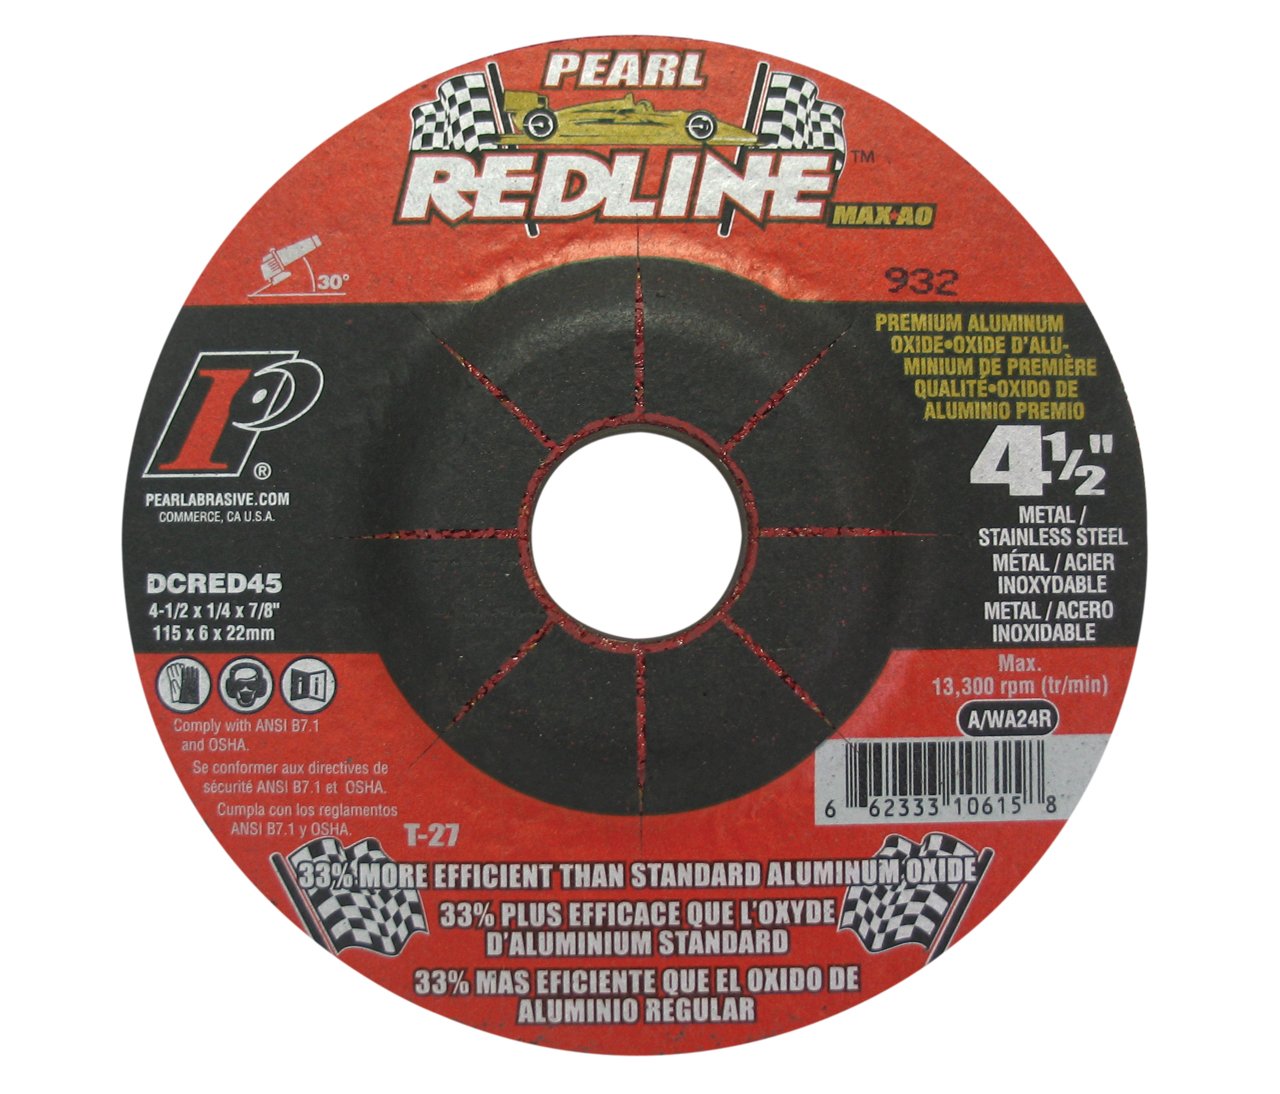 Pearl Abrasive DCRED45 4-1/2" by 1/4" by 7/8" Depressed Center Grinding Wheels (Box of 25)